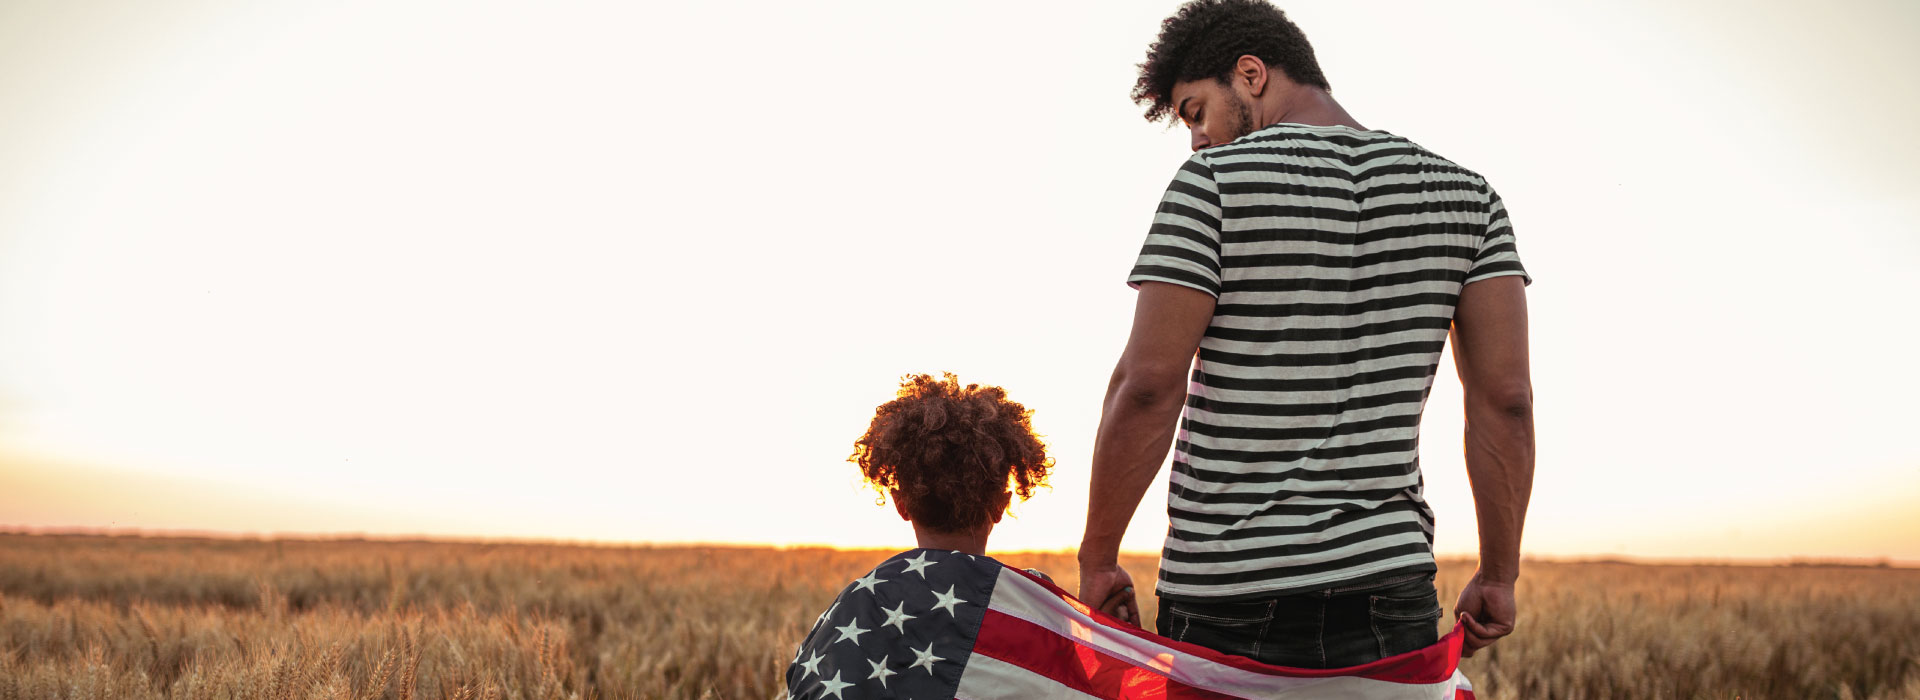 Man and child wrapped in USA flag